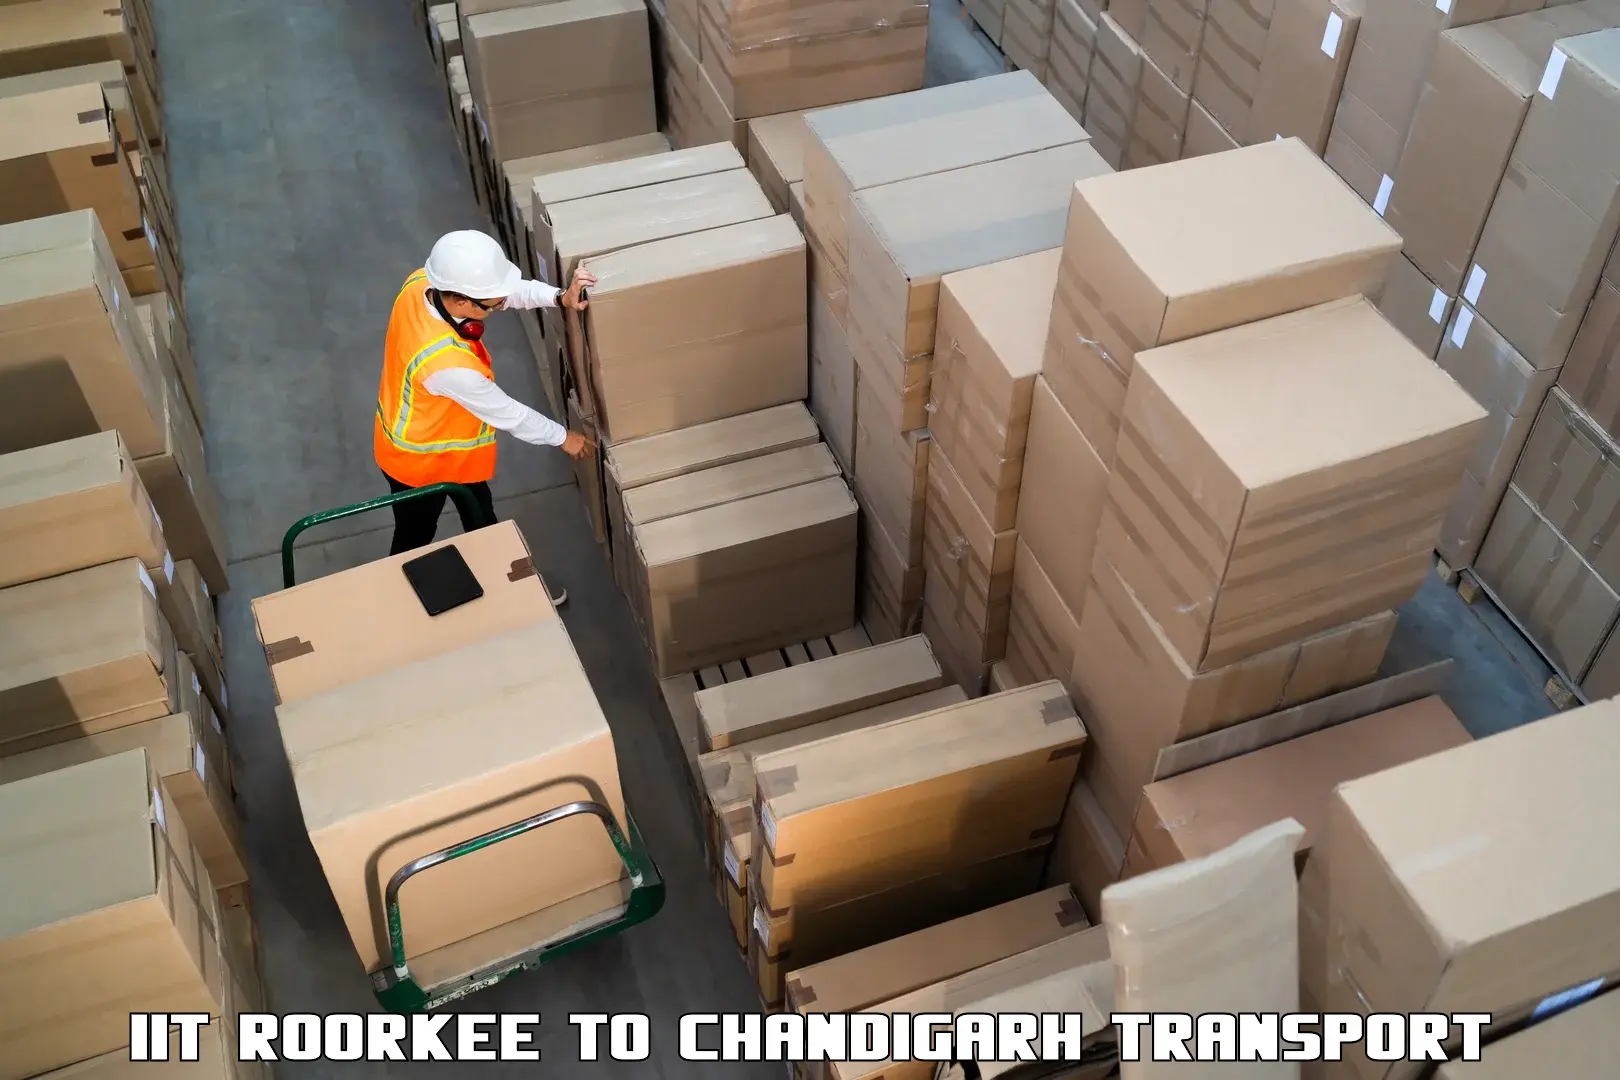 Commercial transport service IIT Roorkee to Chandigarh